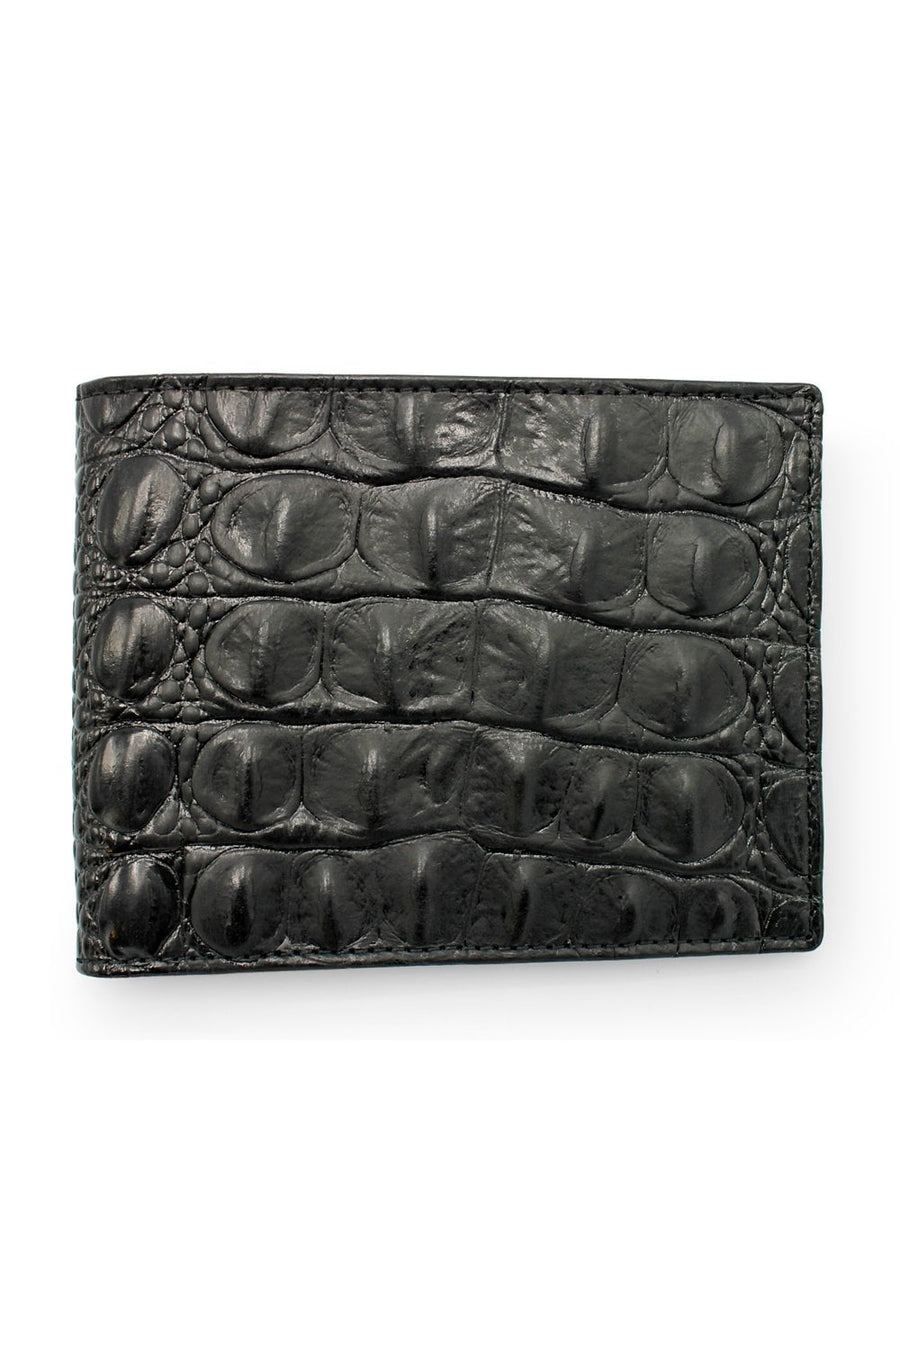 Buy the Elliot Rhodes Coco Jenny Wallet in Black at Intro. Spend £50 for free UK delivery. Official stockists. We ship worldwide.